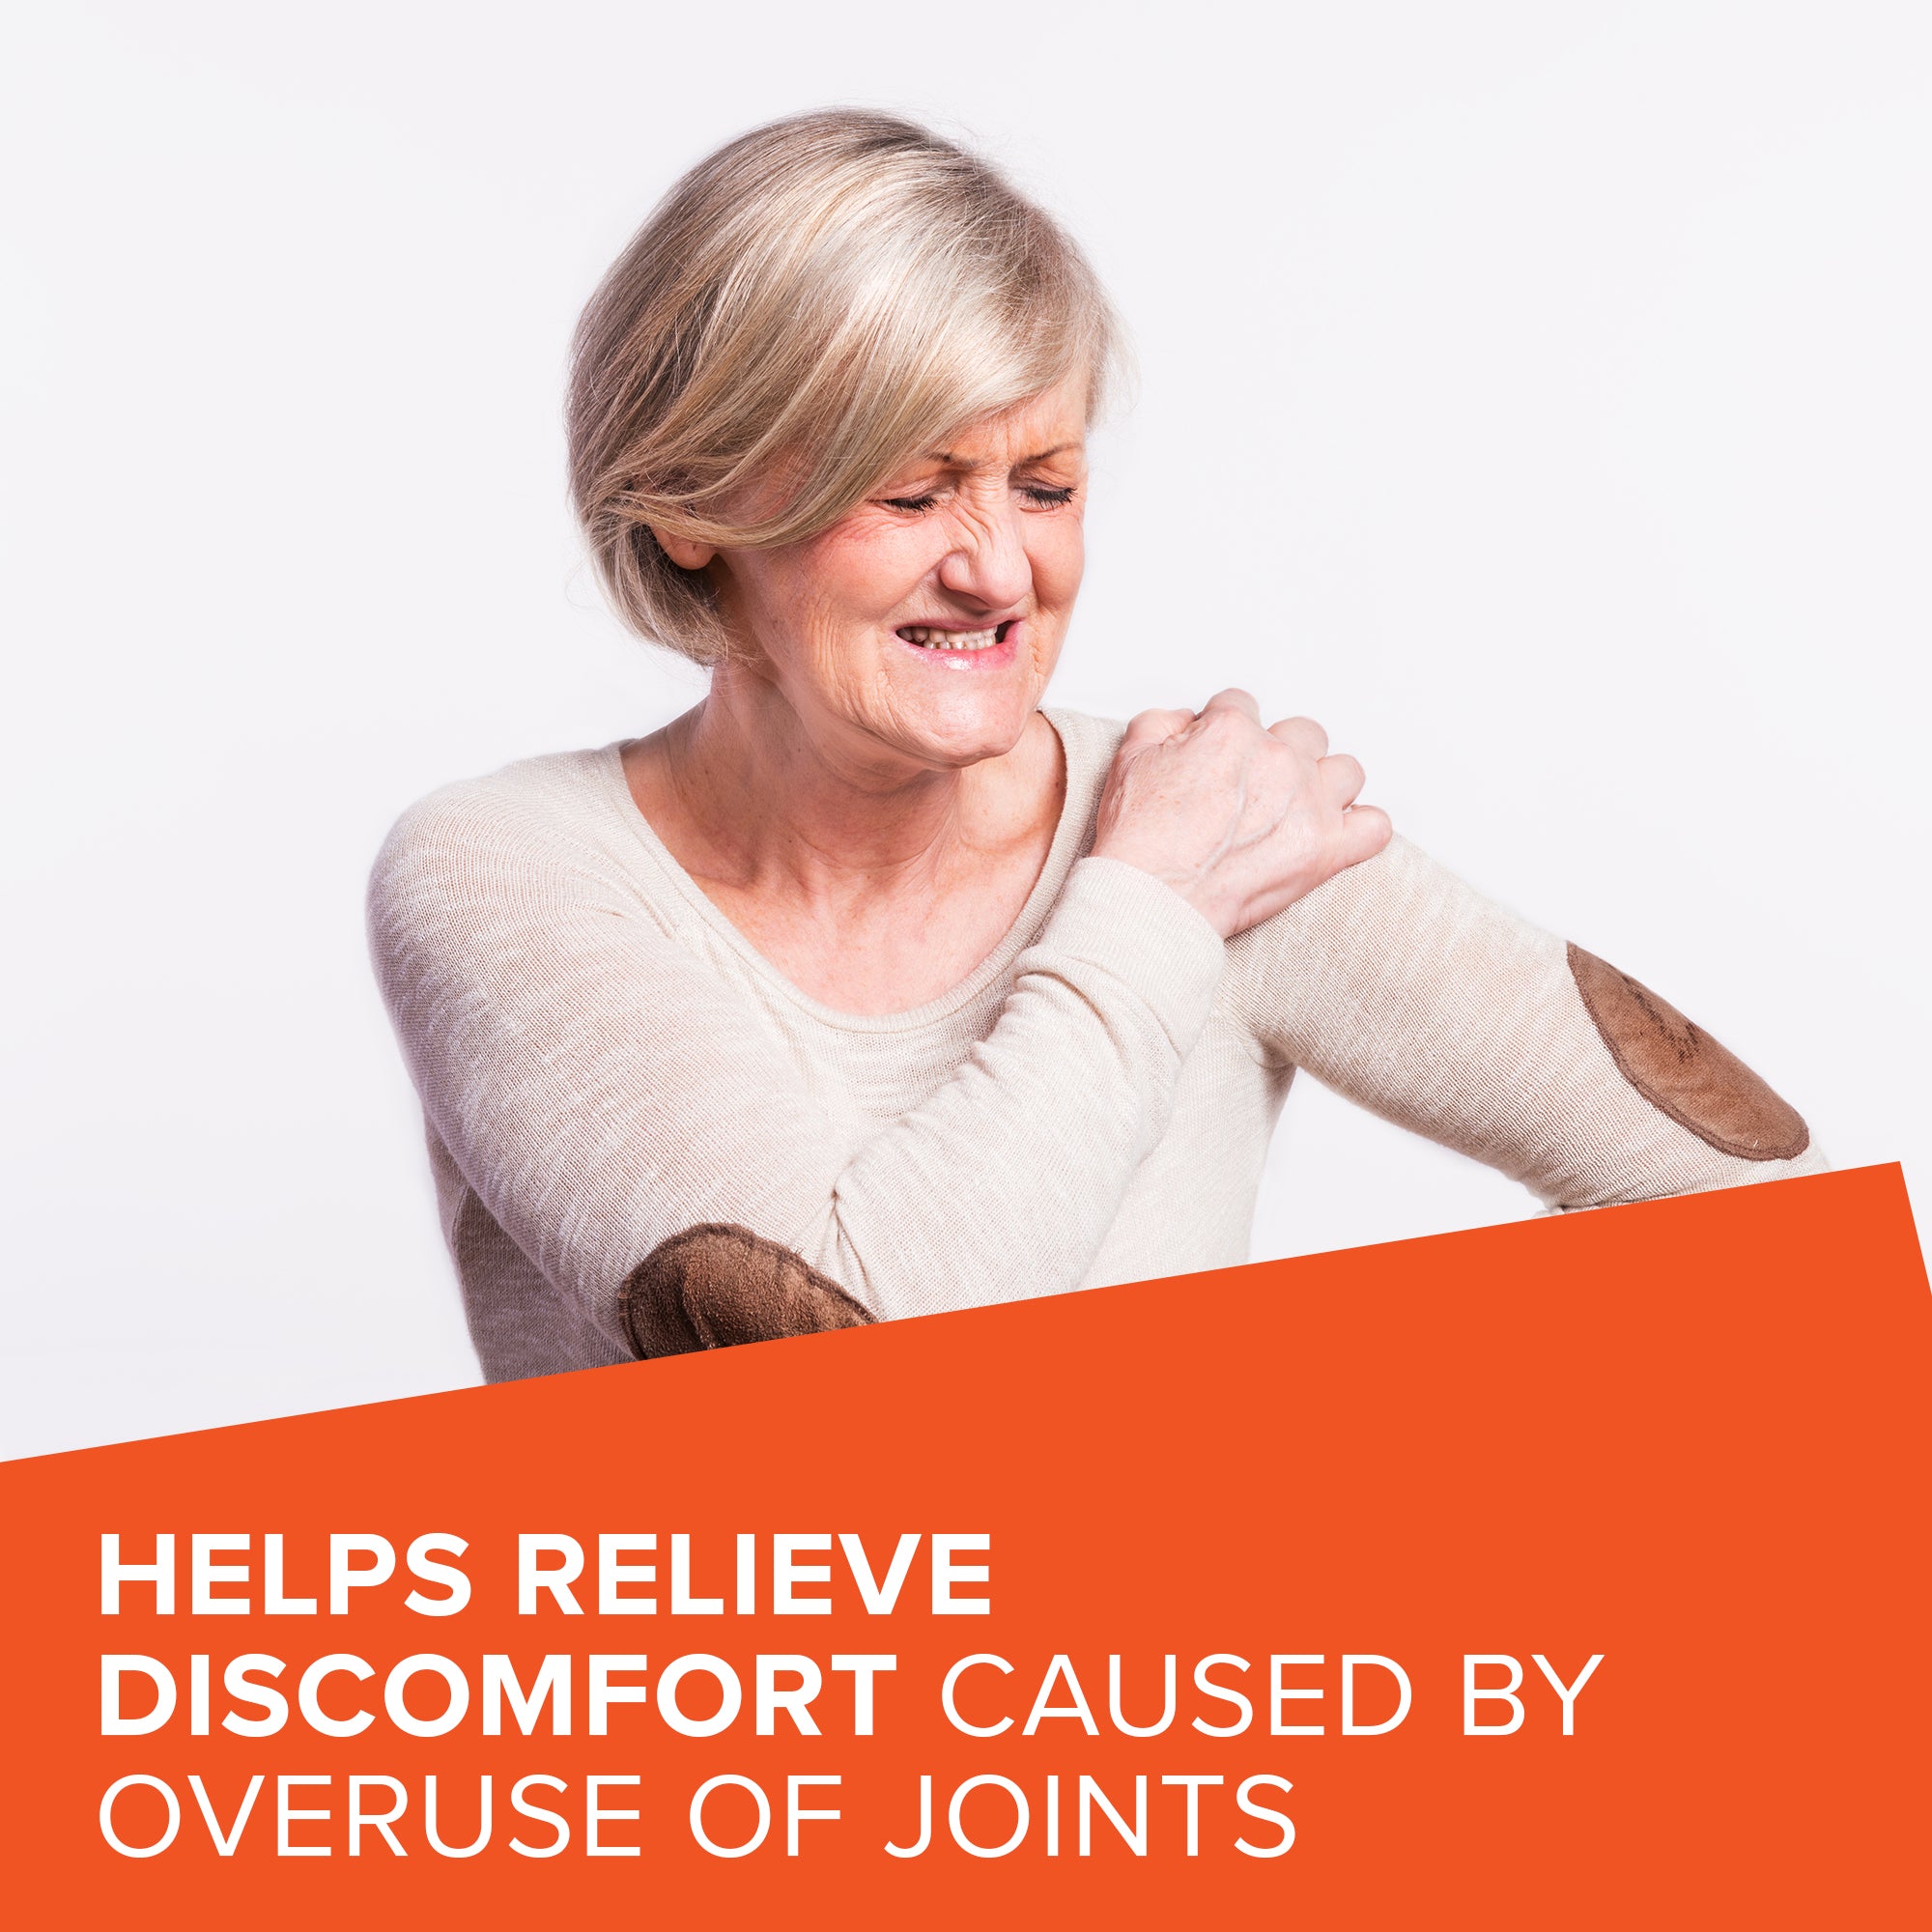 Qunol 5-in-1 Joint Support helps relieve discomfort caused by overuse of joints